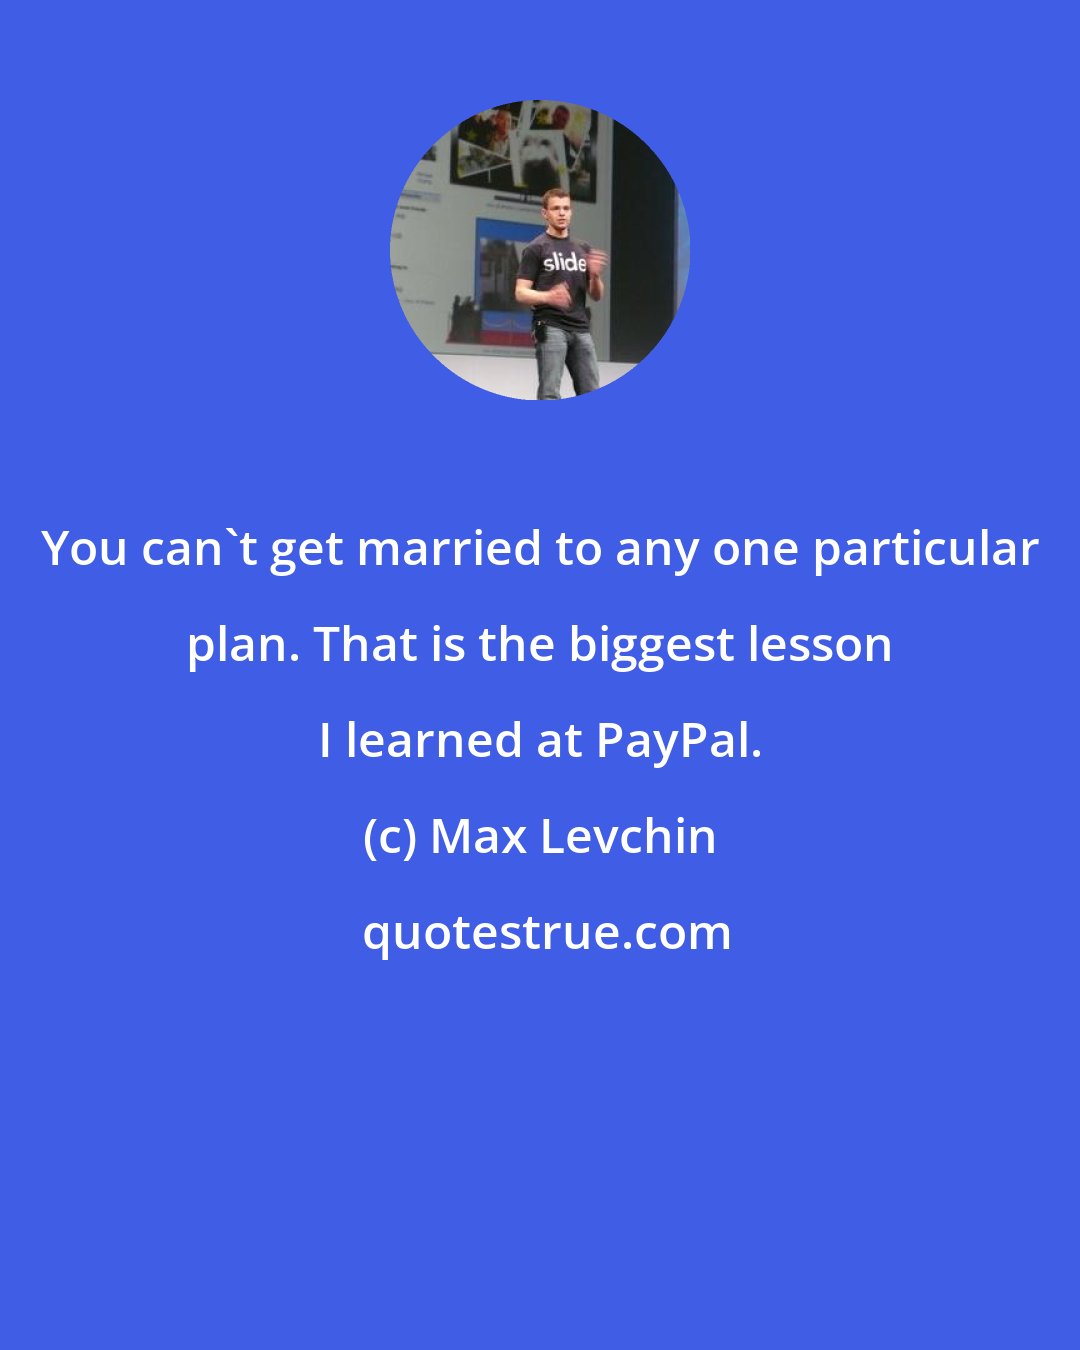 Max Levchin: You can't get married to any one particular plan. That is the biggest lesson I learned at PayPal.